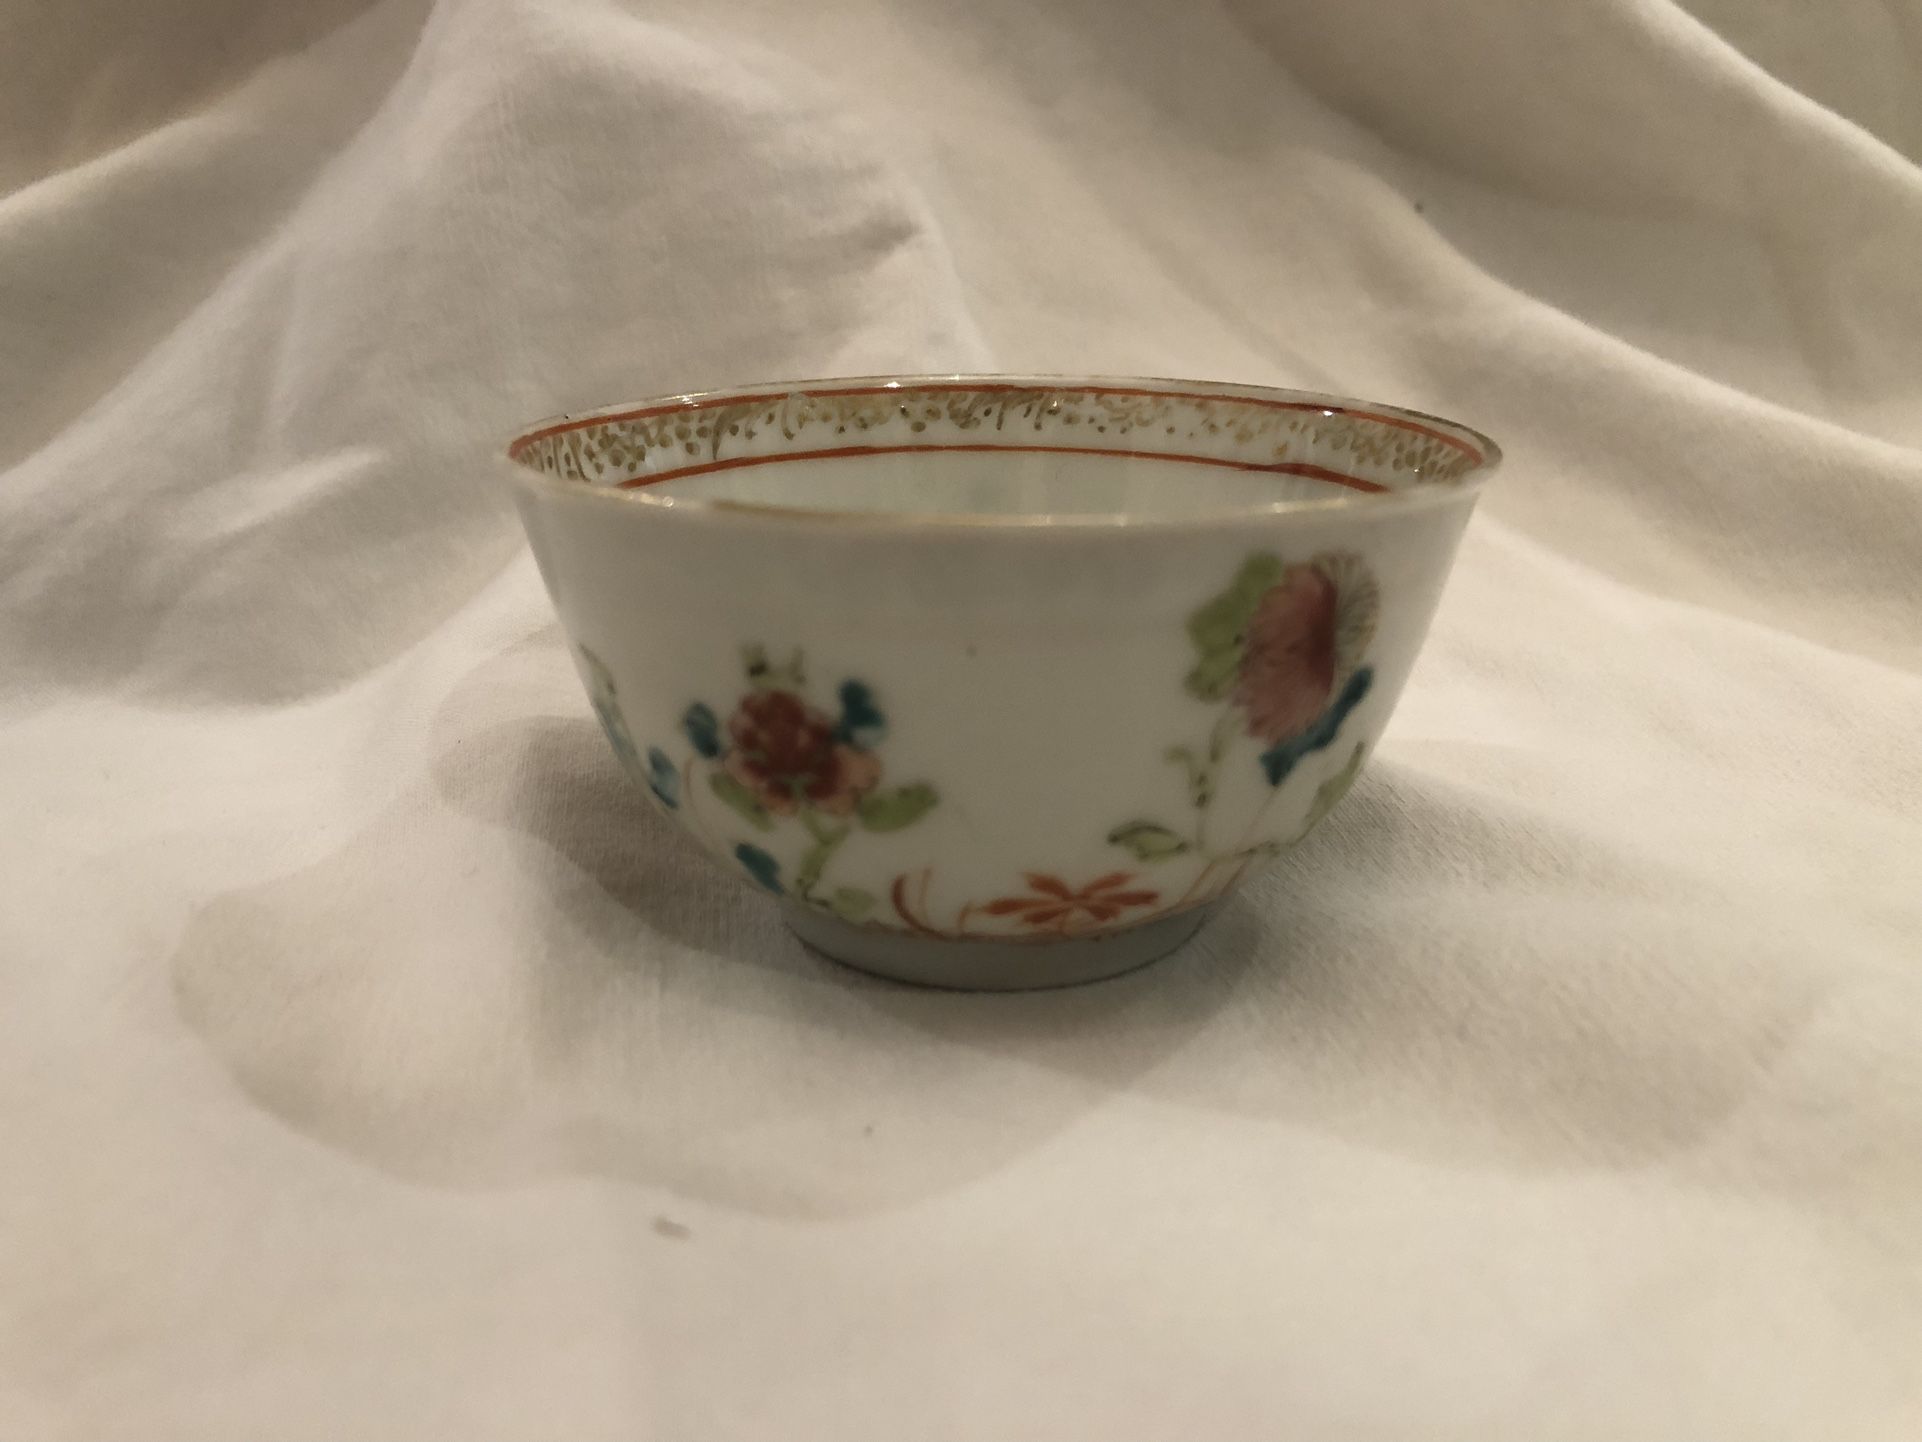 3x2 Inch Asian Little Bowl- Painted With Birds, Flowers & Pretty Gold Paint Trim In Bowl